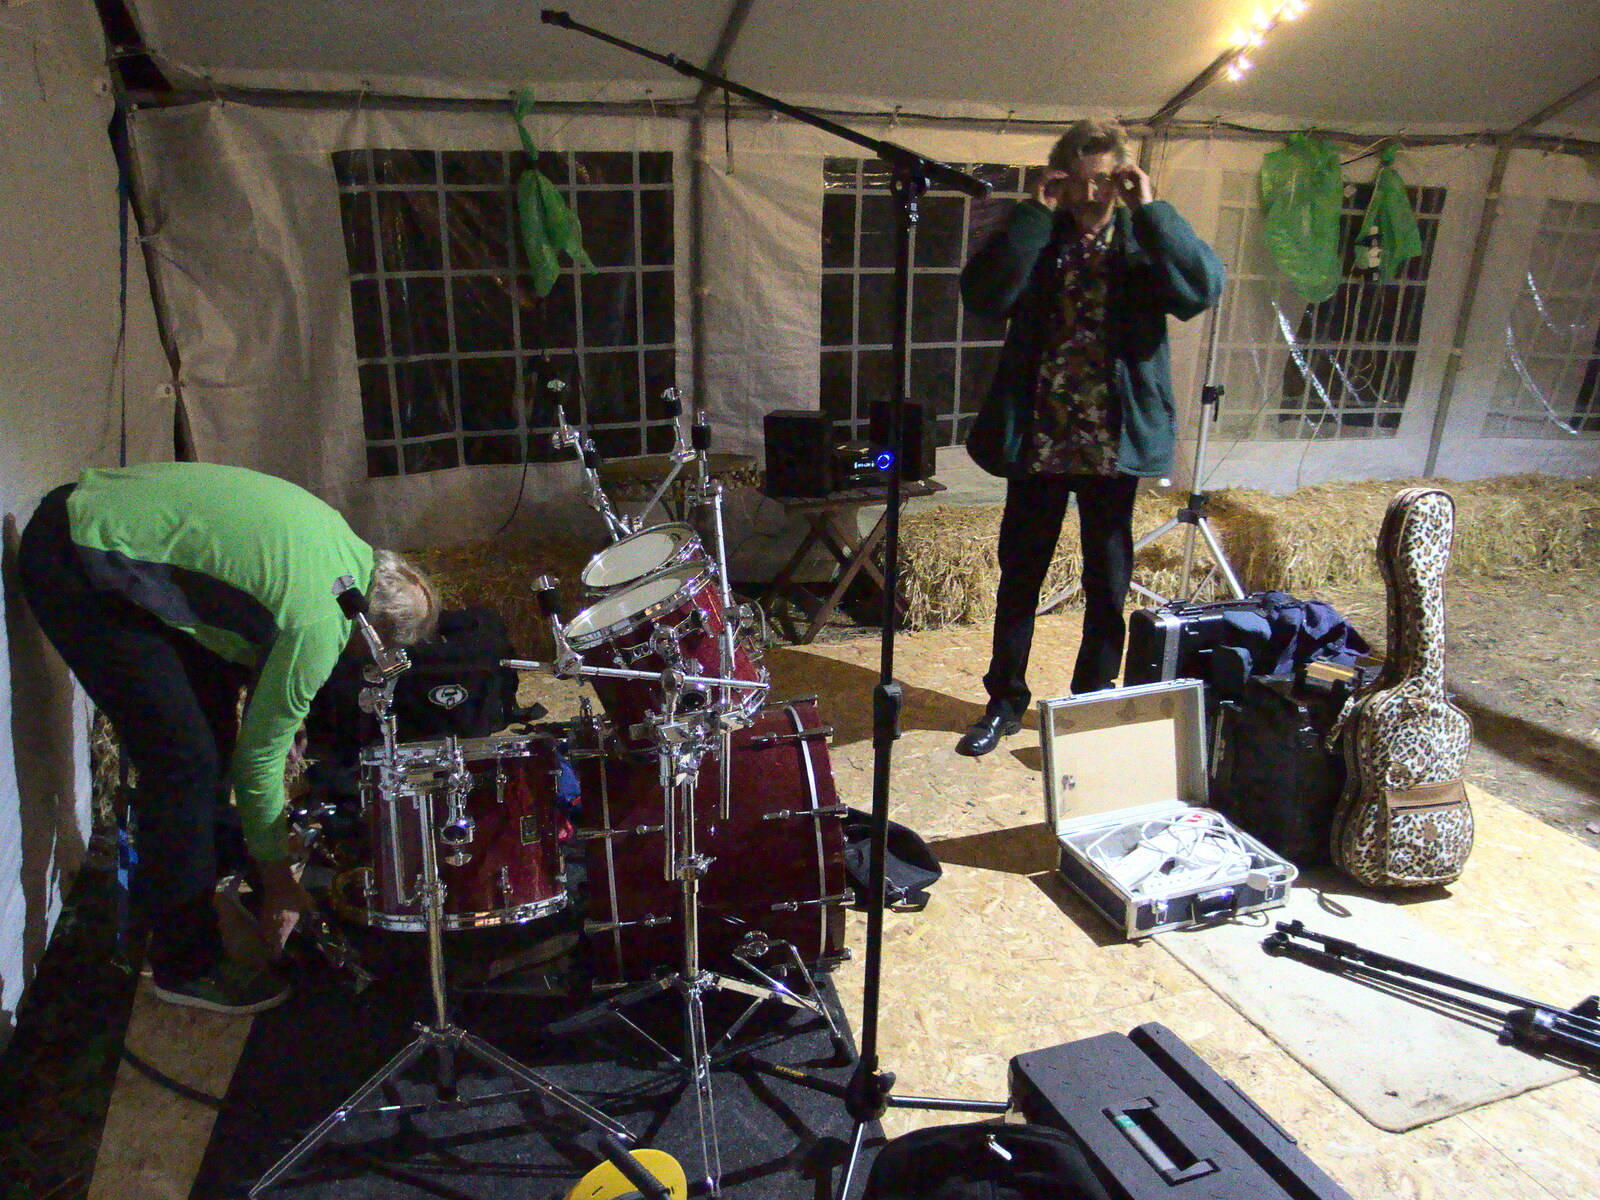 Packing up at 1am from Soph the Roph's Birthday and The BBs at Pulham, Norfolk - 22nd July 2015